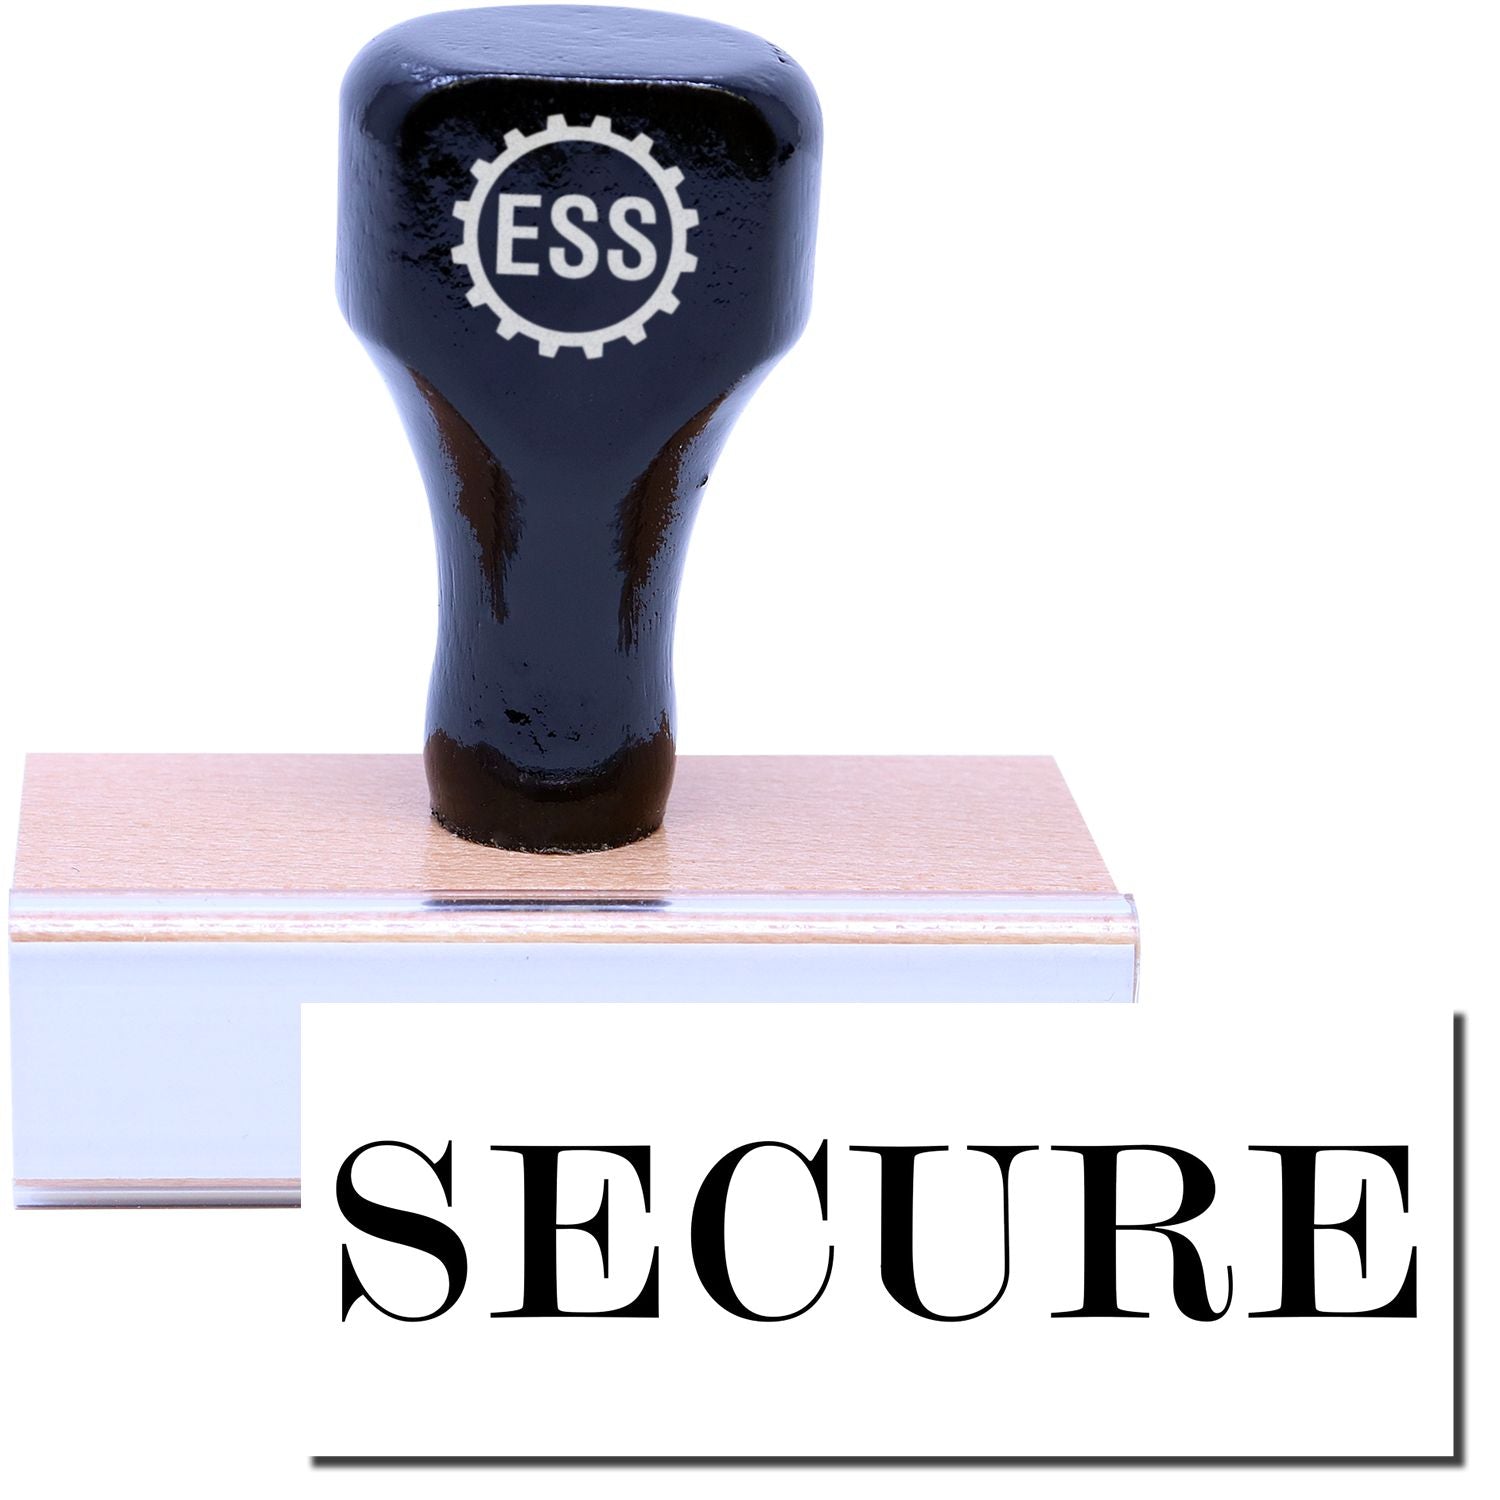 A stock office rubber stamp with a stamped image showing how the text "SECURE" in a large font is displayed after stamping.